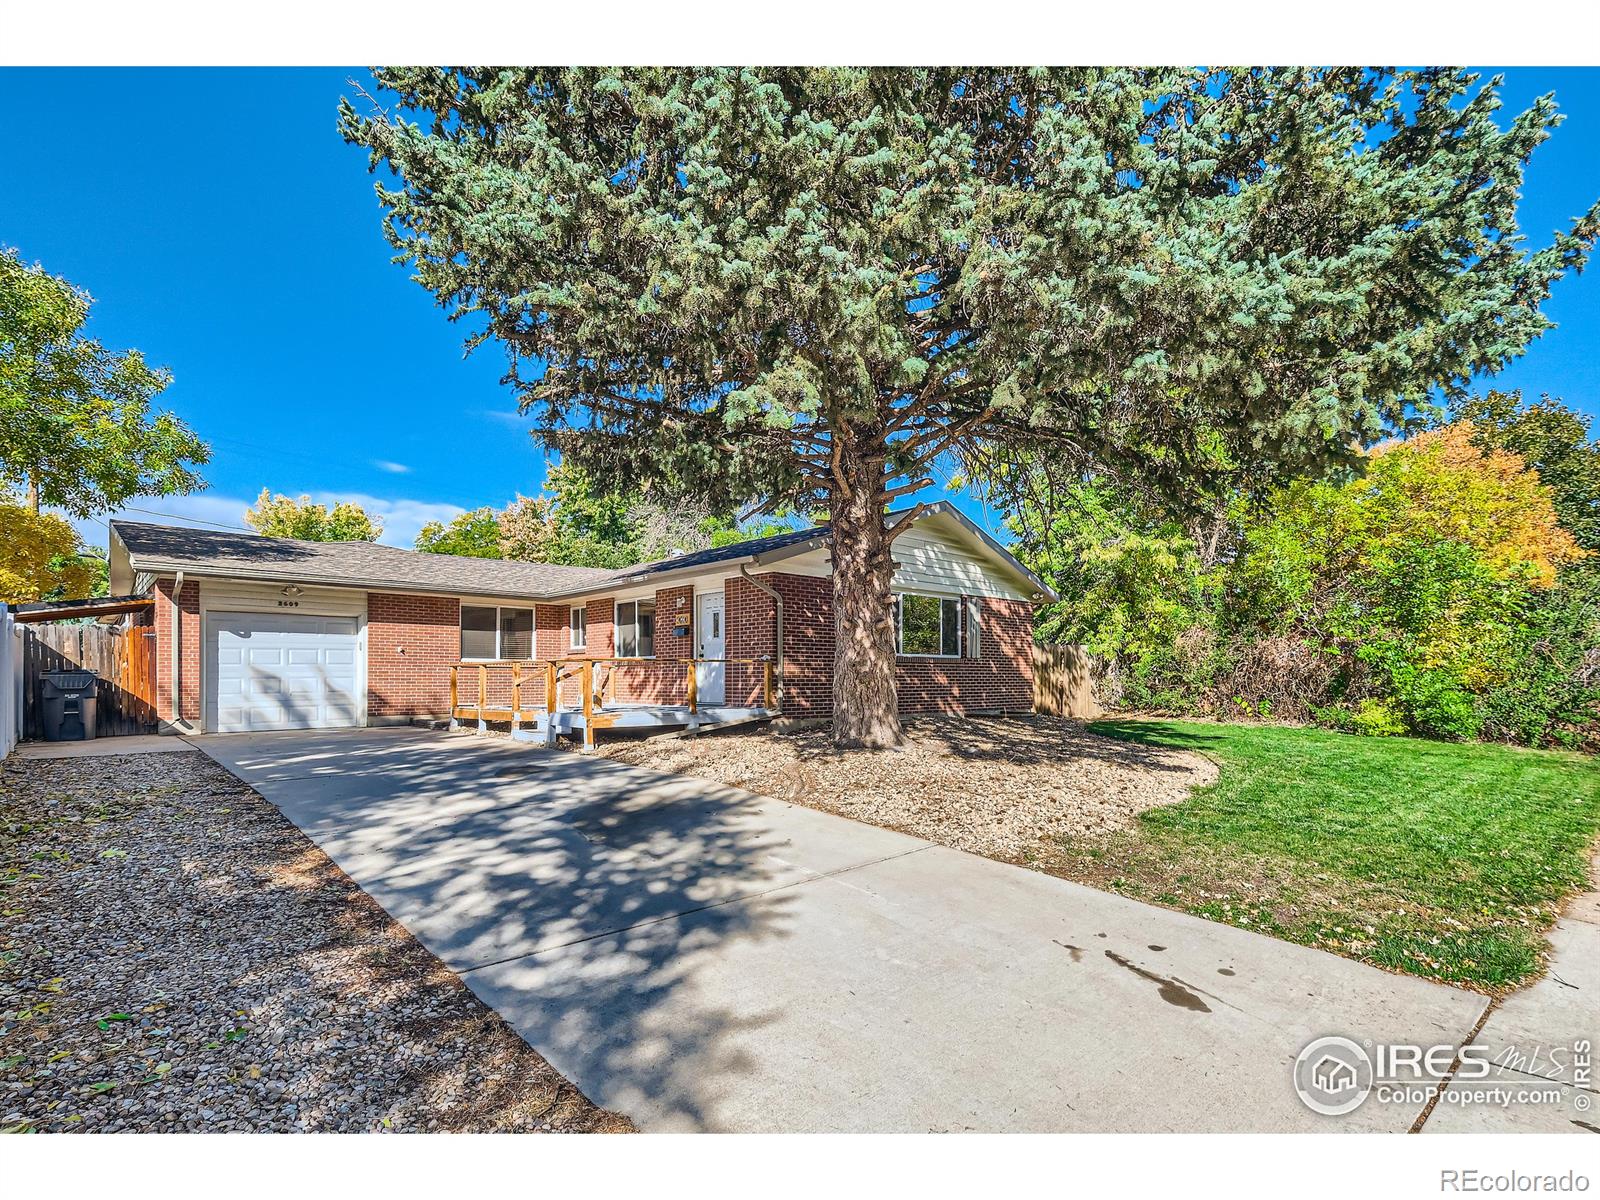 2609  15th Ave Ct, greeley MLS: 4567891002358 Beds: 4 Baths: 3 Price: $408,500